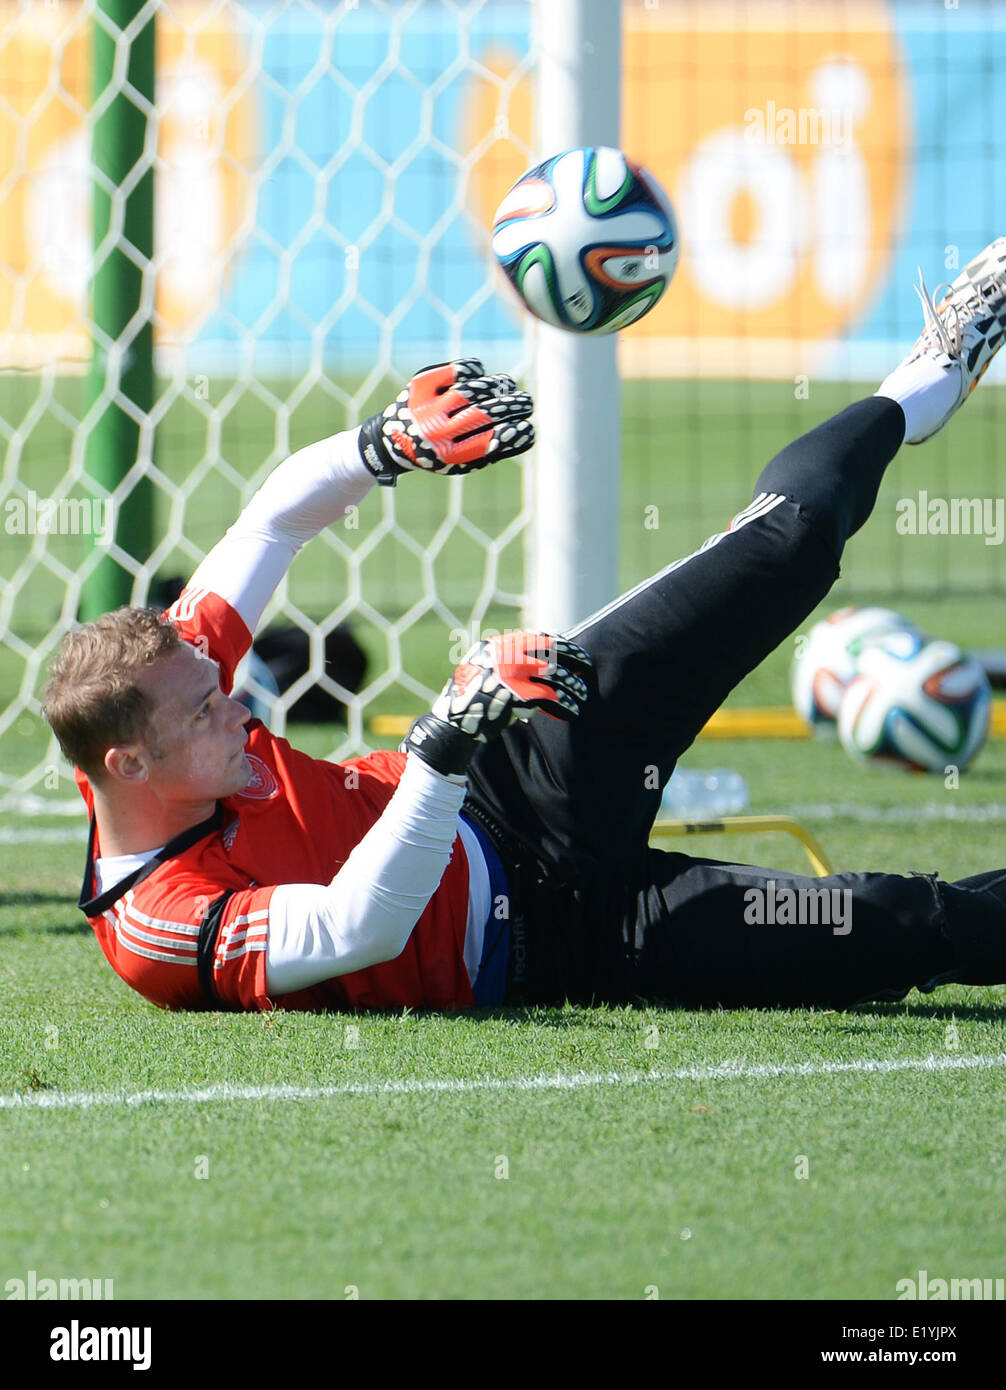 Goalkeeper Manuel Neuer of the German national soccer team in action during a training session in Santo Andre in Brazil, 11 June 2014. The FIFA World Cup 2014 will take place in Brazil from 12 June to 13 July 2014. Photo: Andreas Gebert/dpa Stock Photo